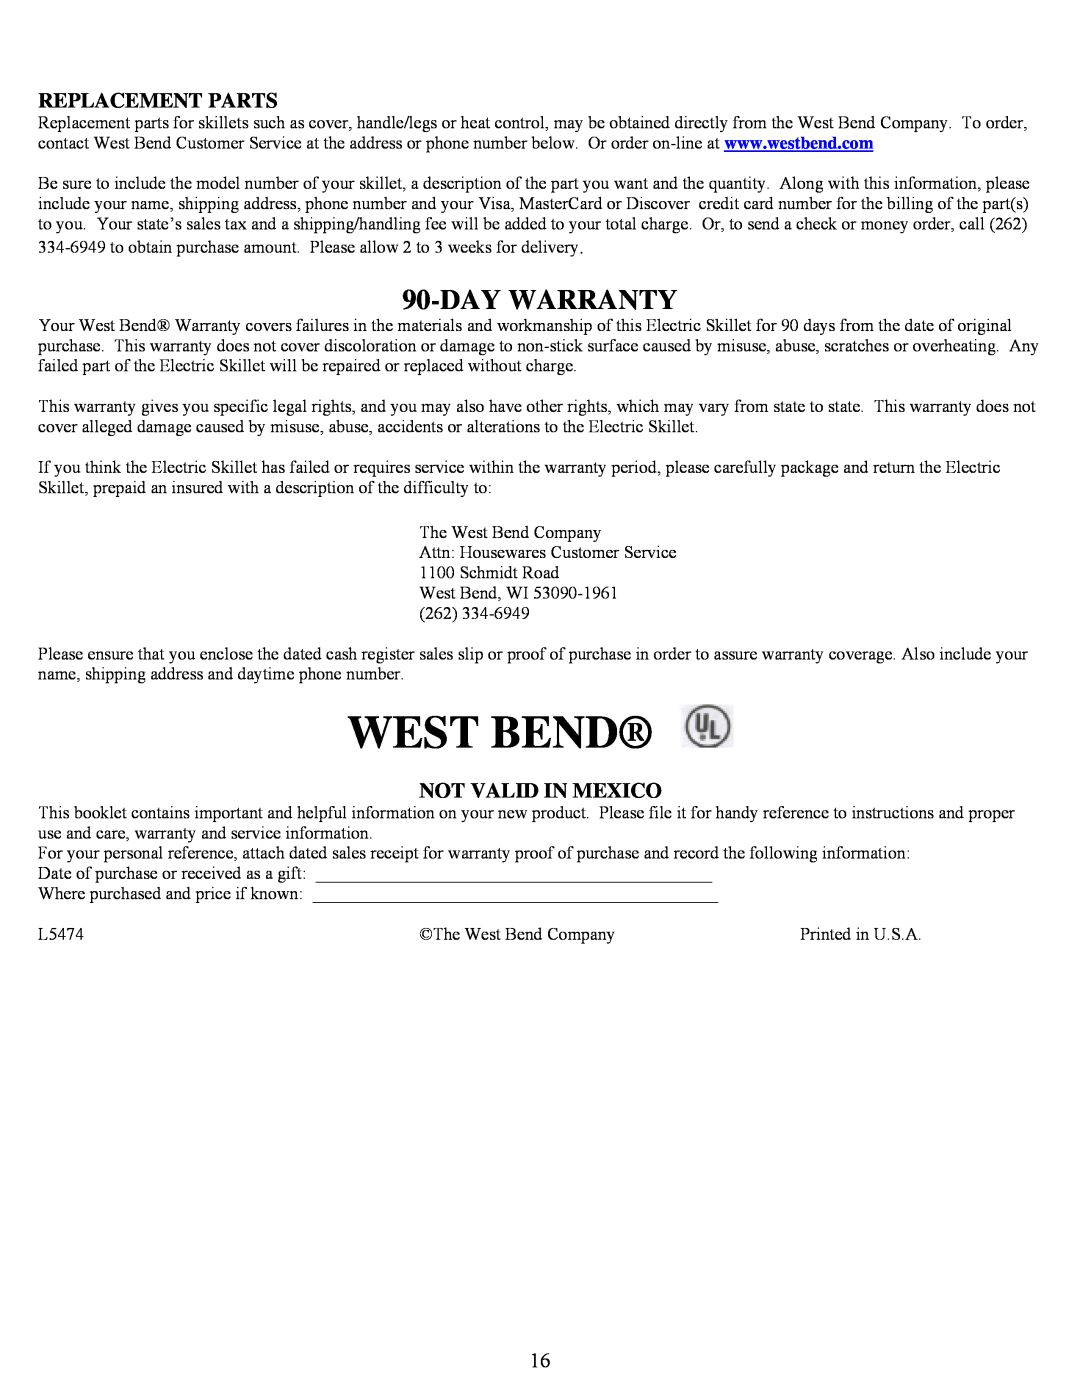 West Bend 72000 instruction manual Day Warranty, Replacement Parts, Not Valid In Mexico, West Bend 